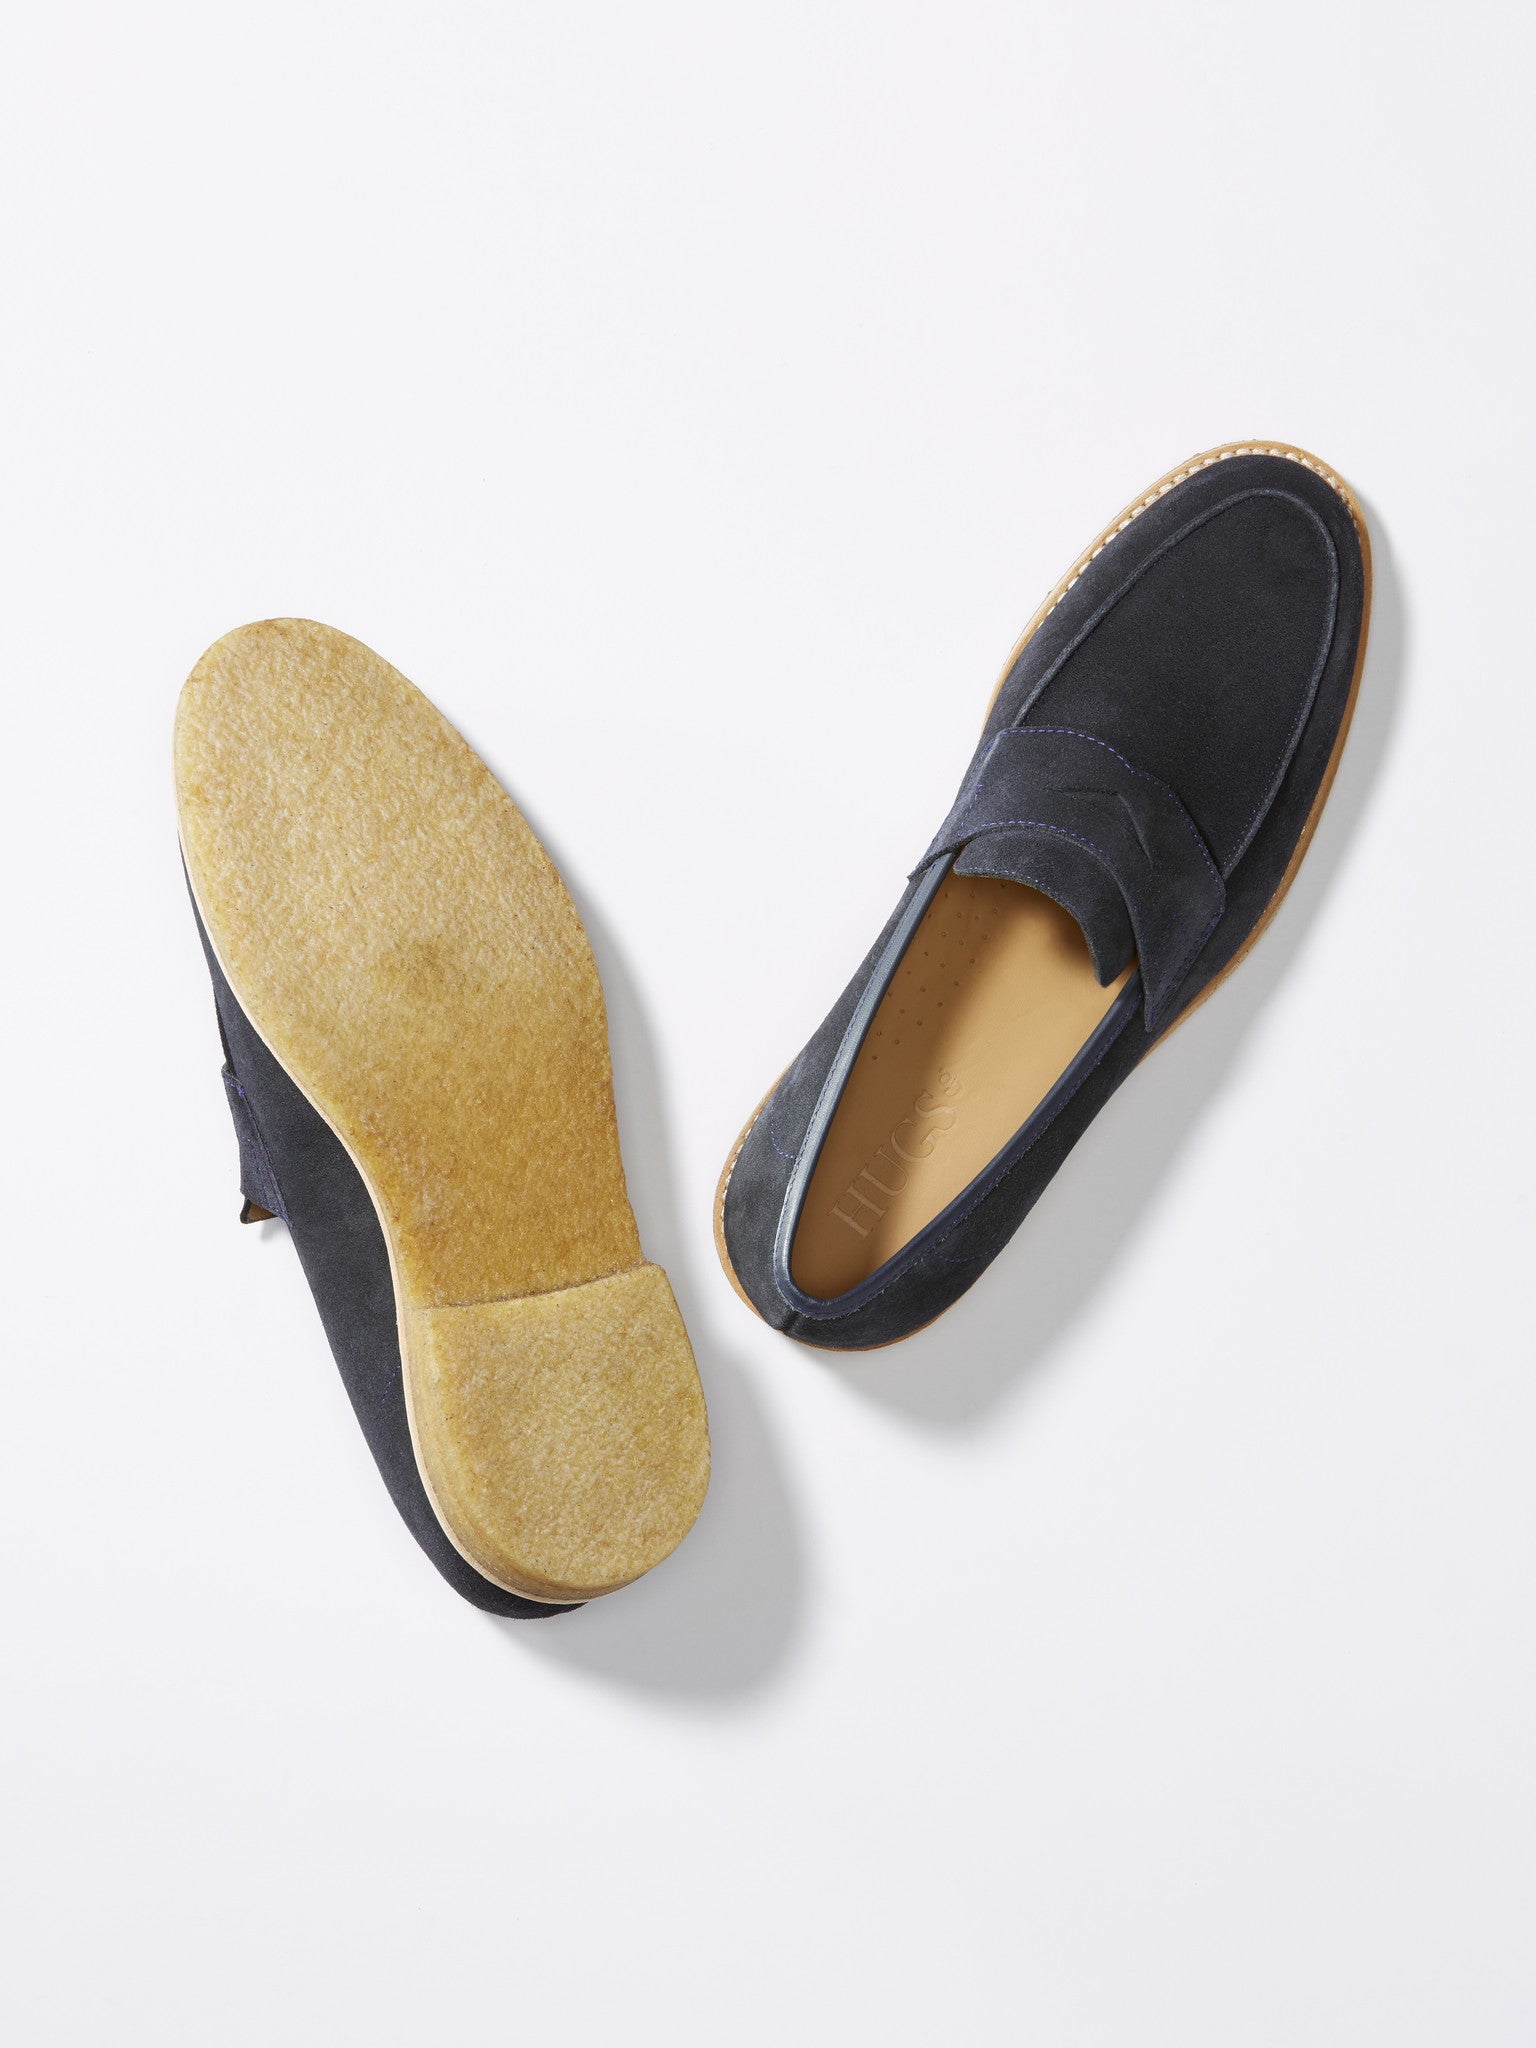 rubber sole loafers mens